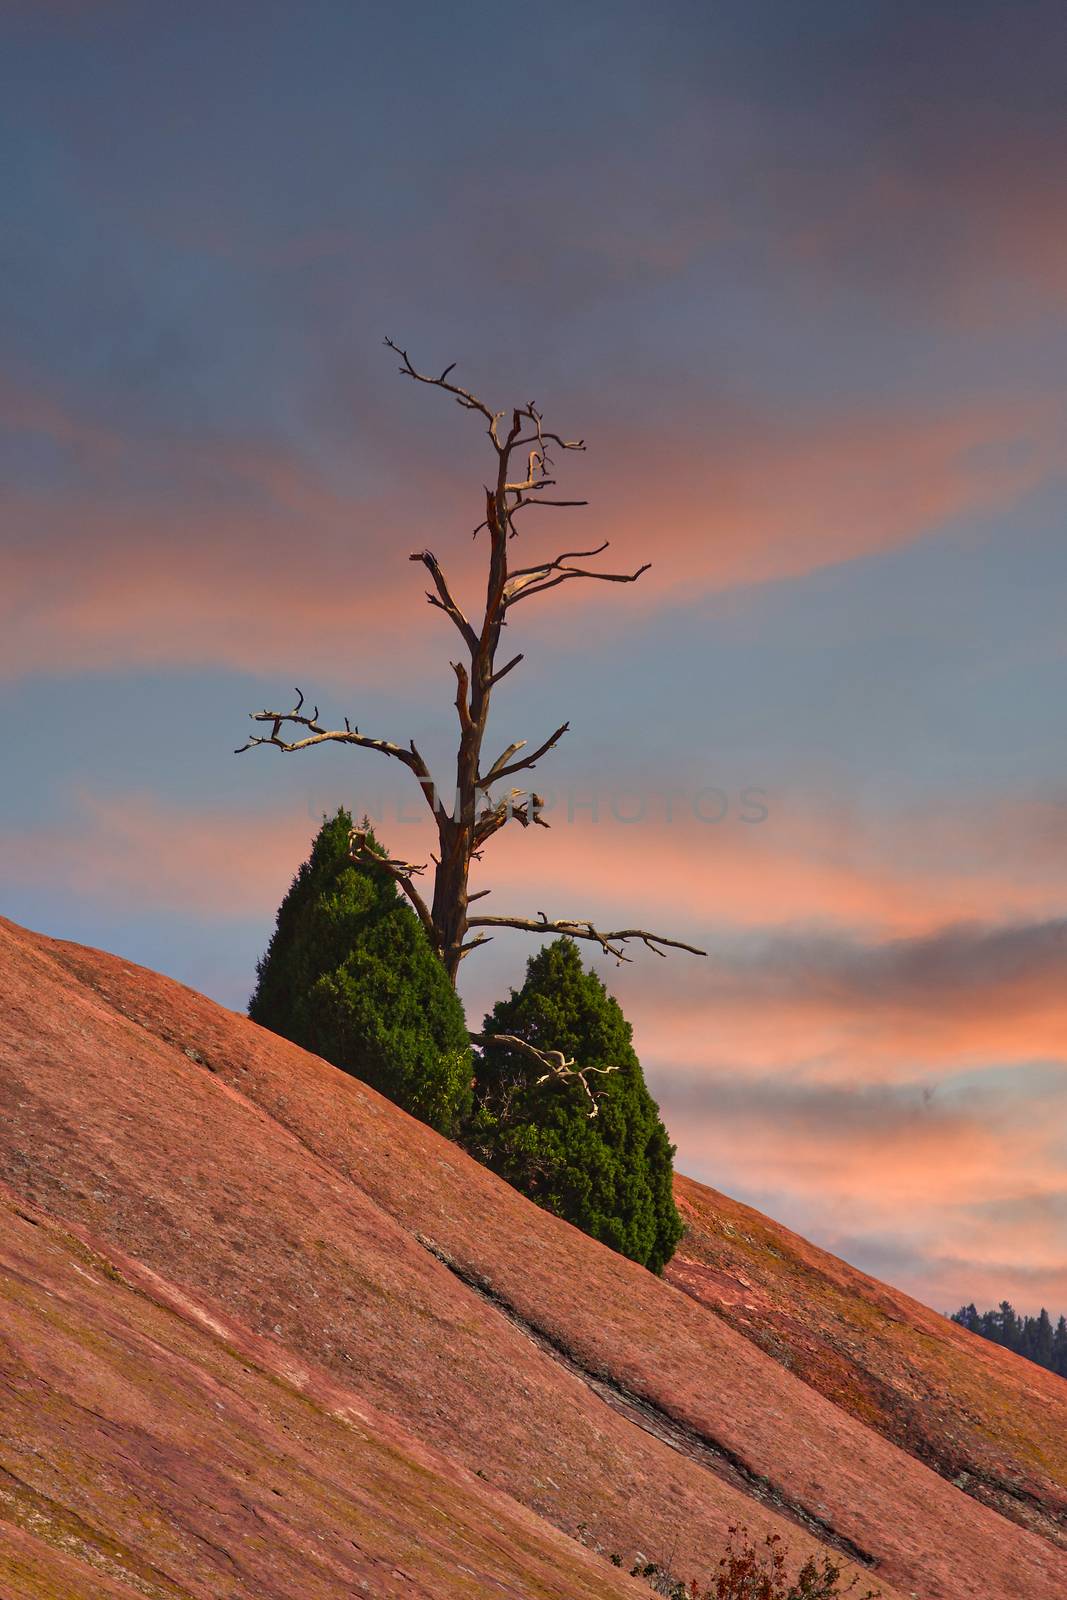 Bare Trees on Rock Mountain at Dusk by dbvirago